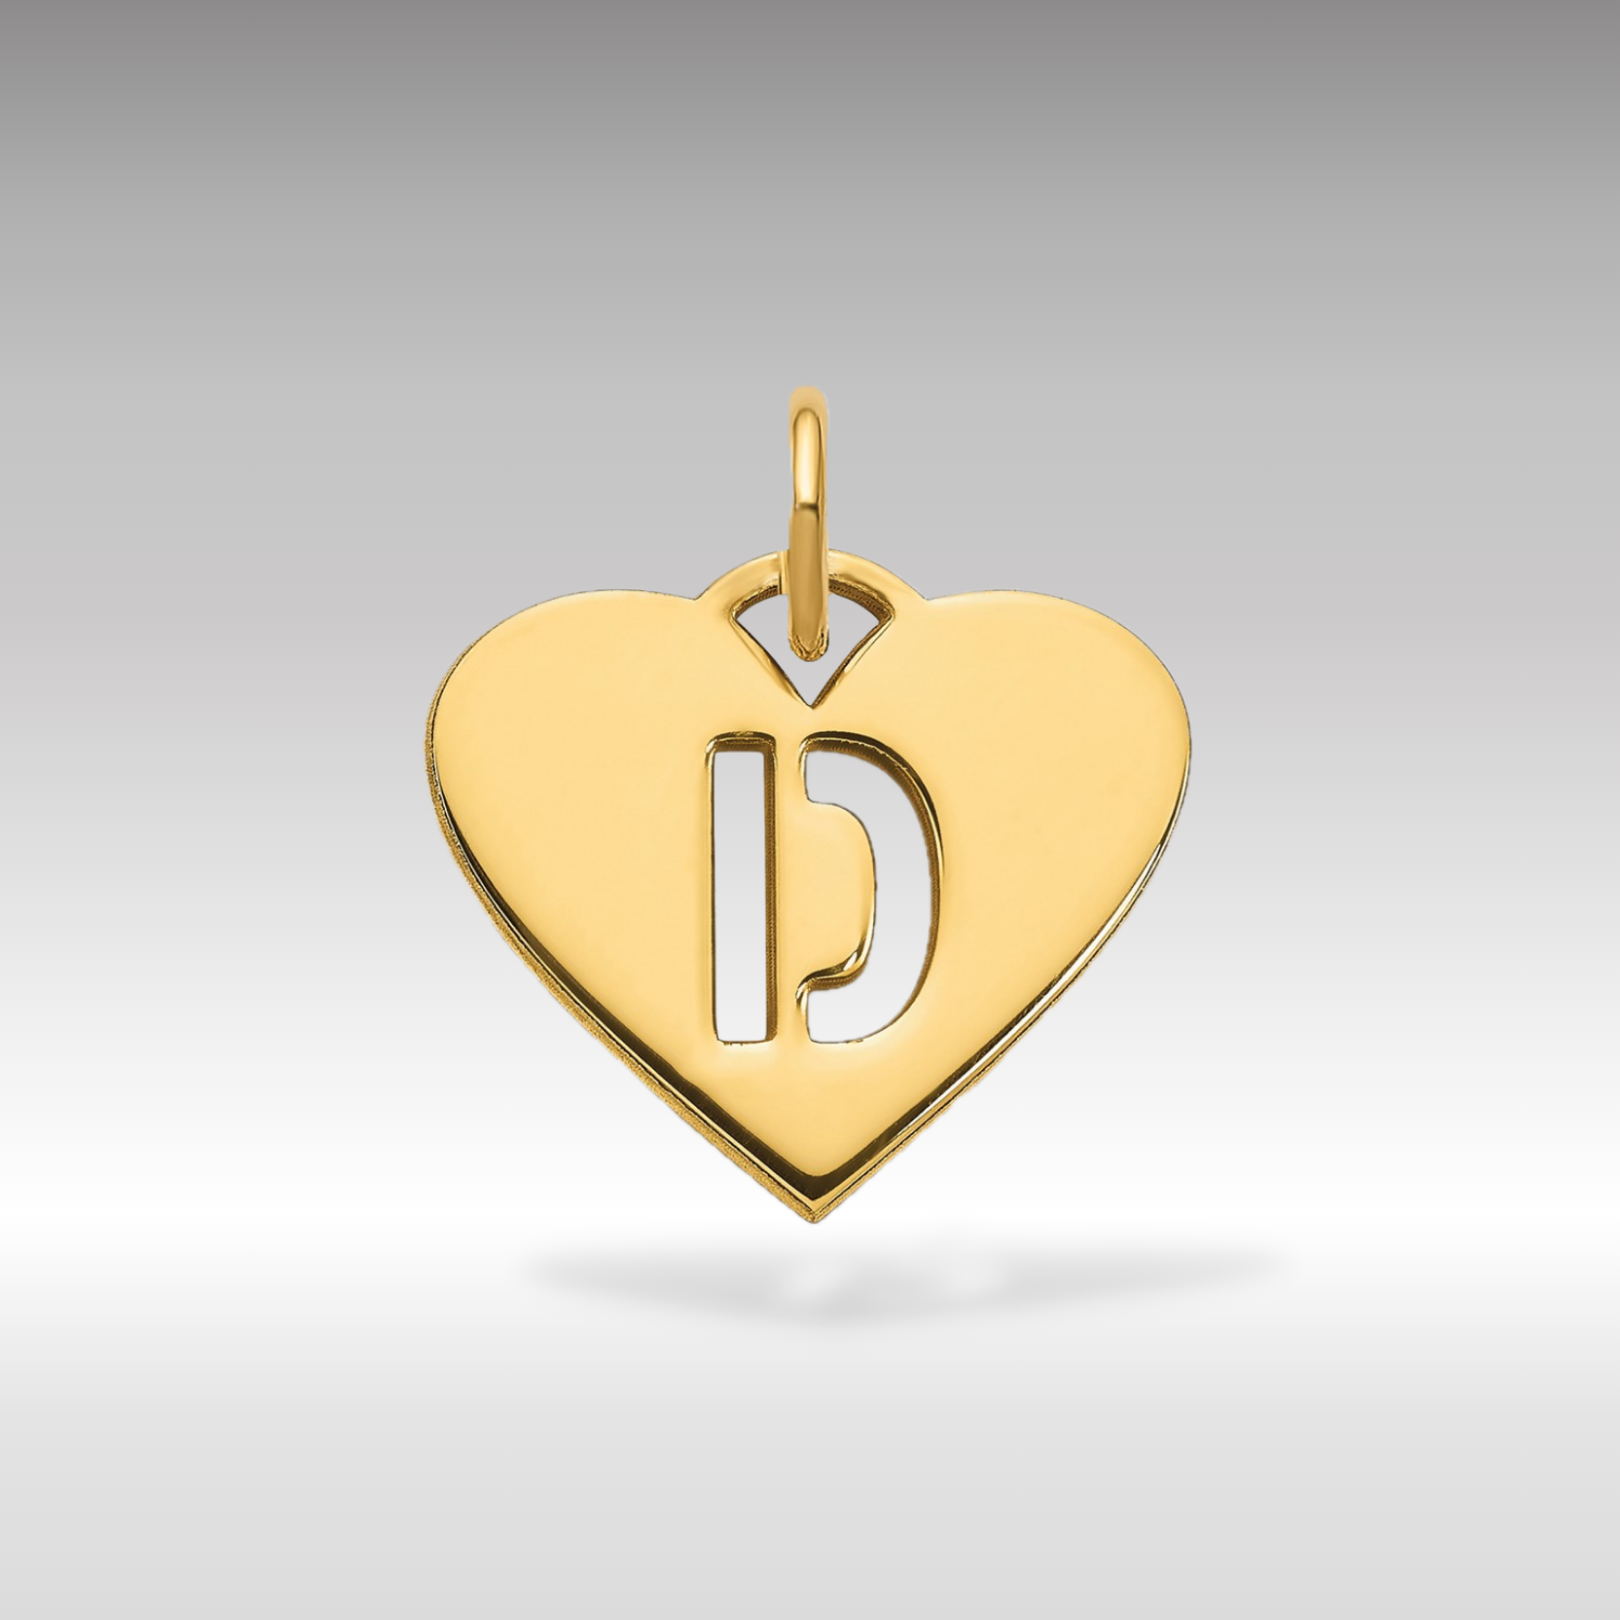 14K Gold Heart Pendant with Letter 'D' - Charlie & Co. Jewelry